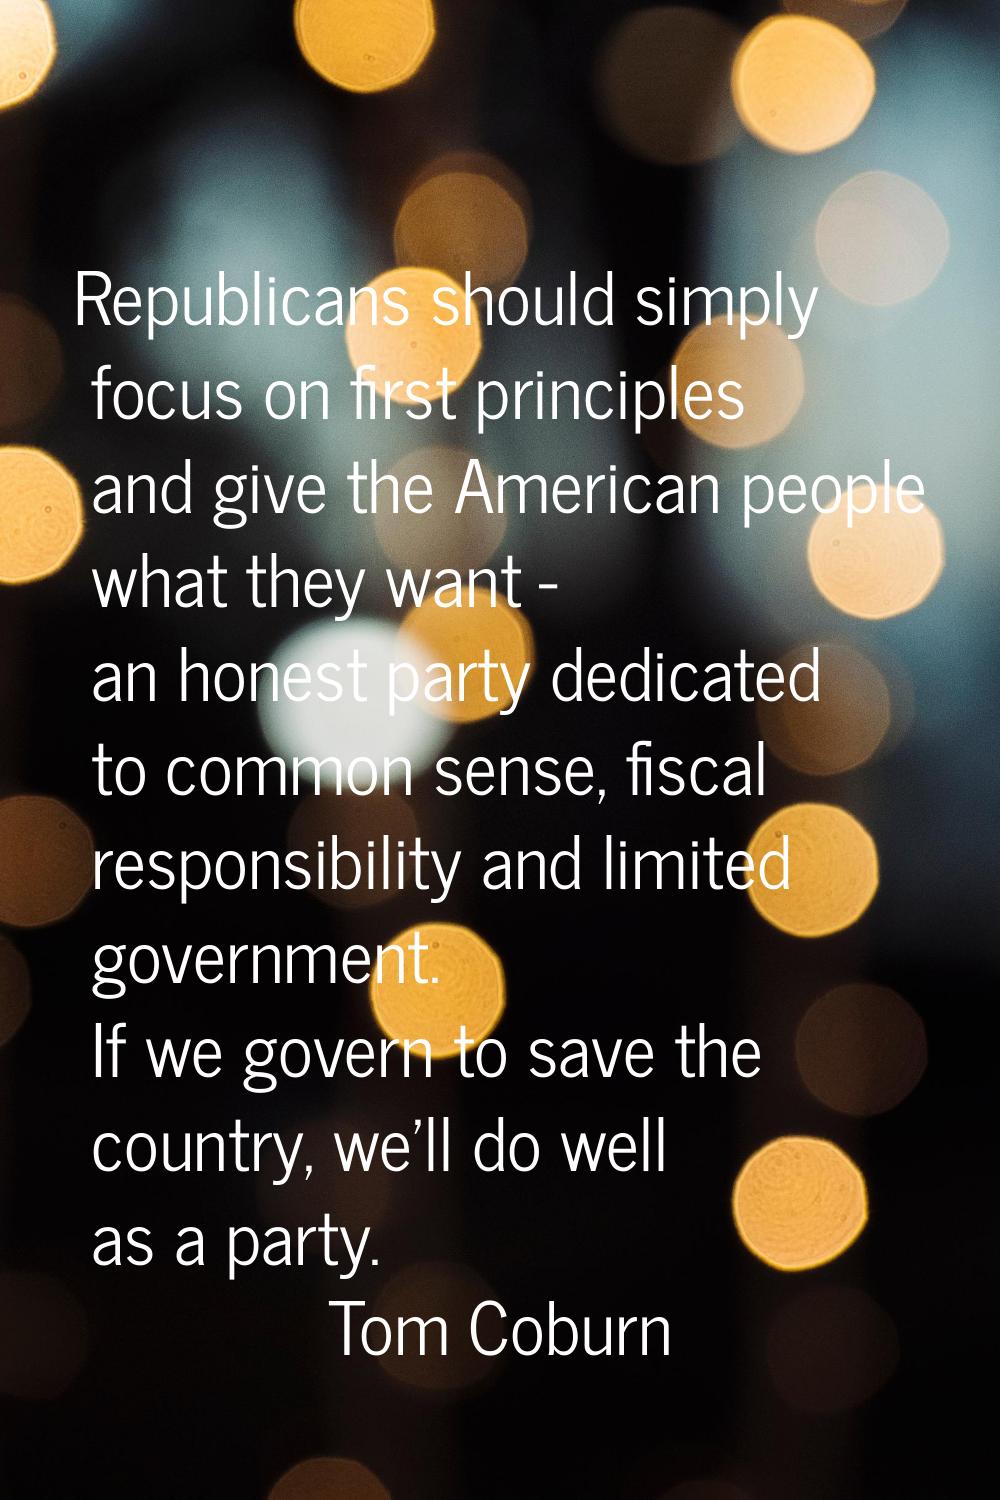 Republicans should simply focus on first principles and give the American people what they want - a